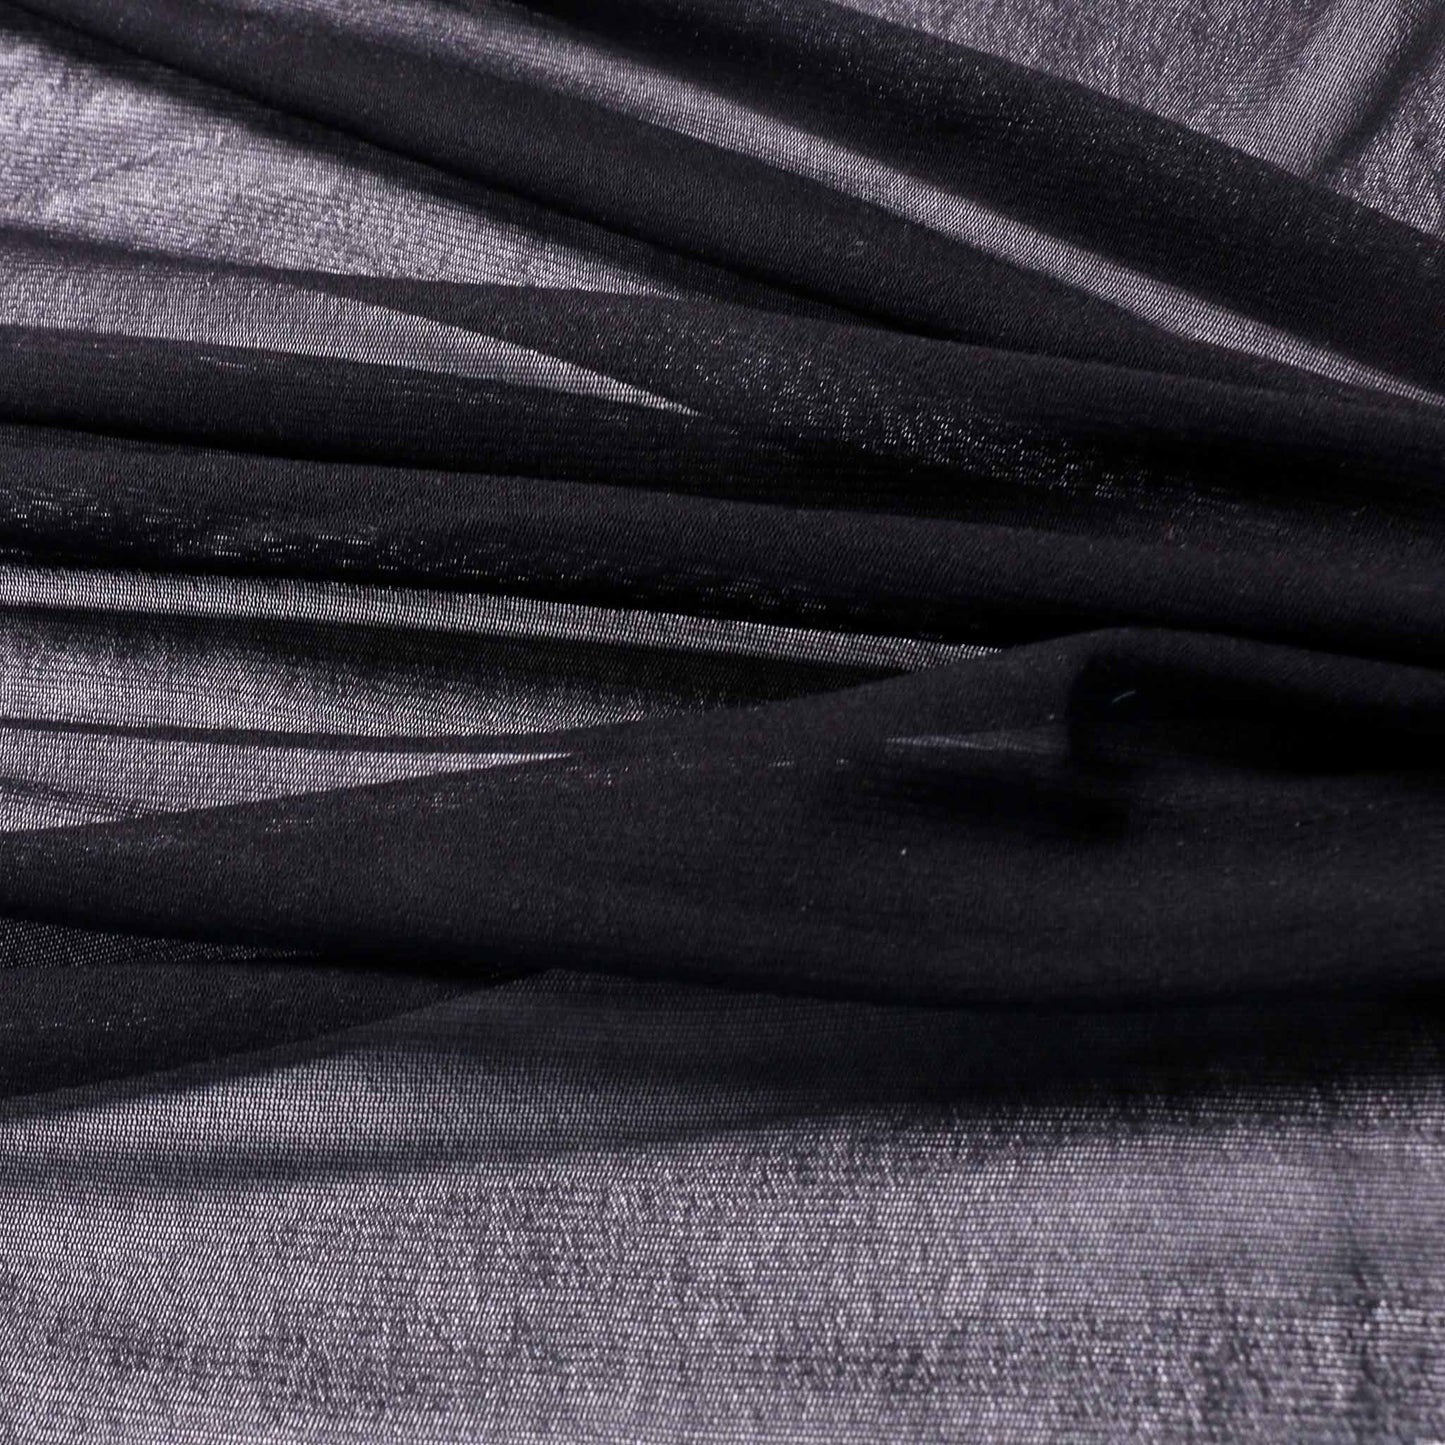 stretchy black netting fabric for dressmaking